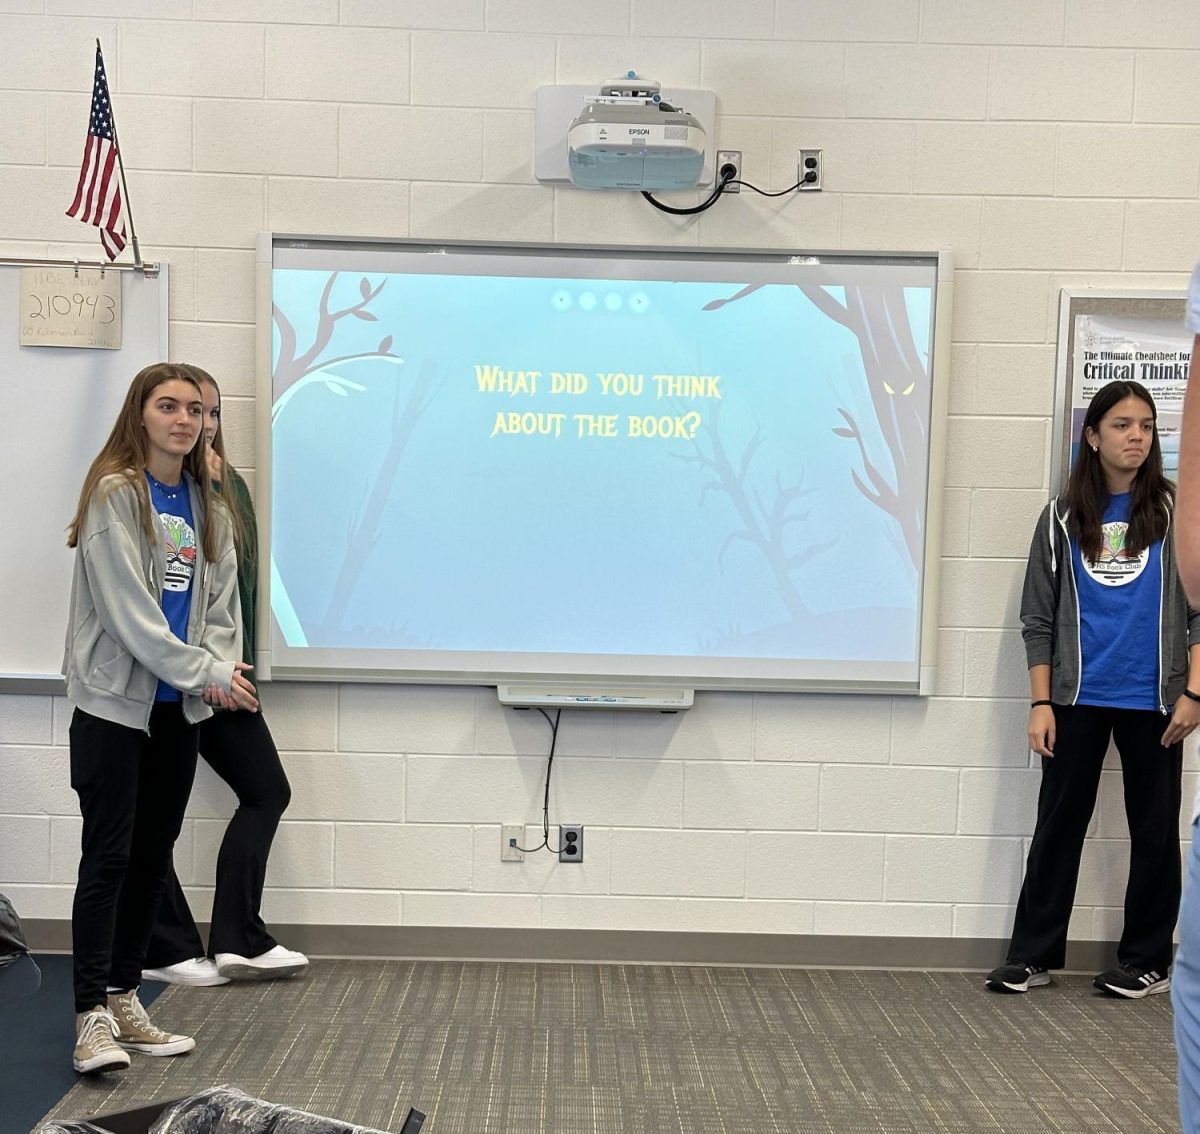 This+photograph+demonstrates+how+students+can+engage+in+the+novel+theyre+reading%2C+and+bond+with+their+peers+and+teachers.+We+see+sophomore+Molly+Procida+leading+her+fellow+students+in+a+session+to+speak+about+their+current+novel+Five+Survive+by+Holly+Jackson.+It+also+helps+students+engage+more+due+to+the+fact+that+they+chose+to+do+this%2C+and+could+leave+at+any+time.